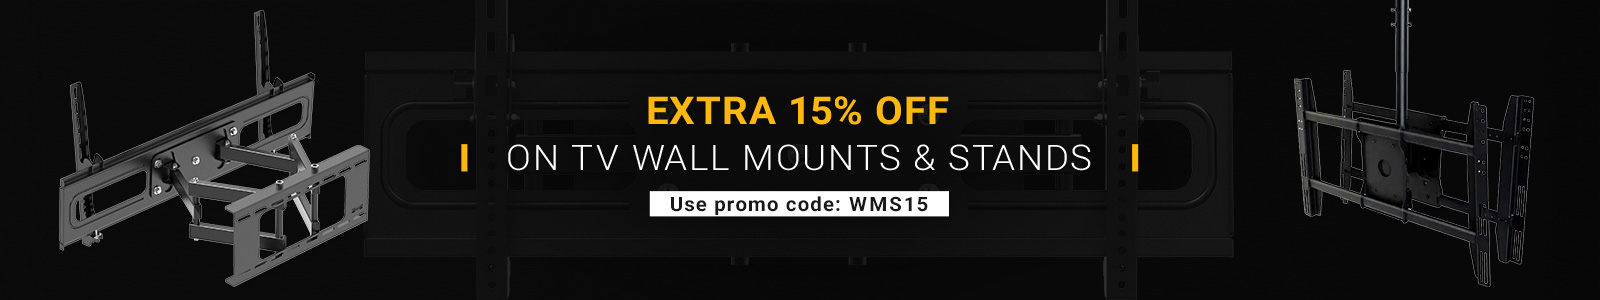 Extra 15% off on TV Wall Mounts & Stand
Use promo code: WMS15
Shop Now